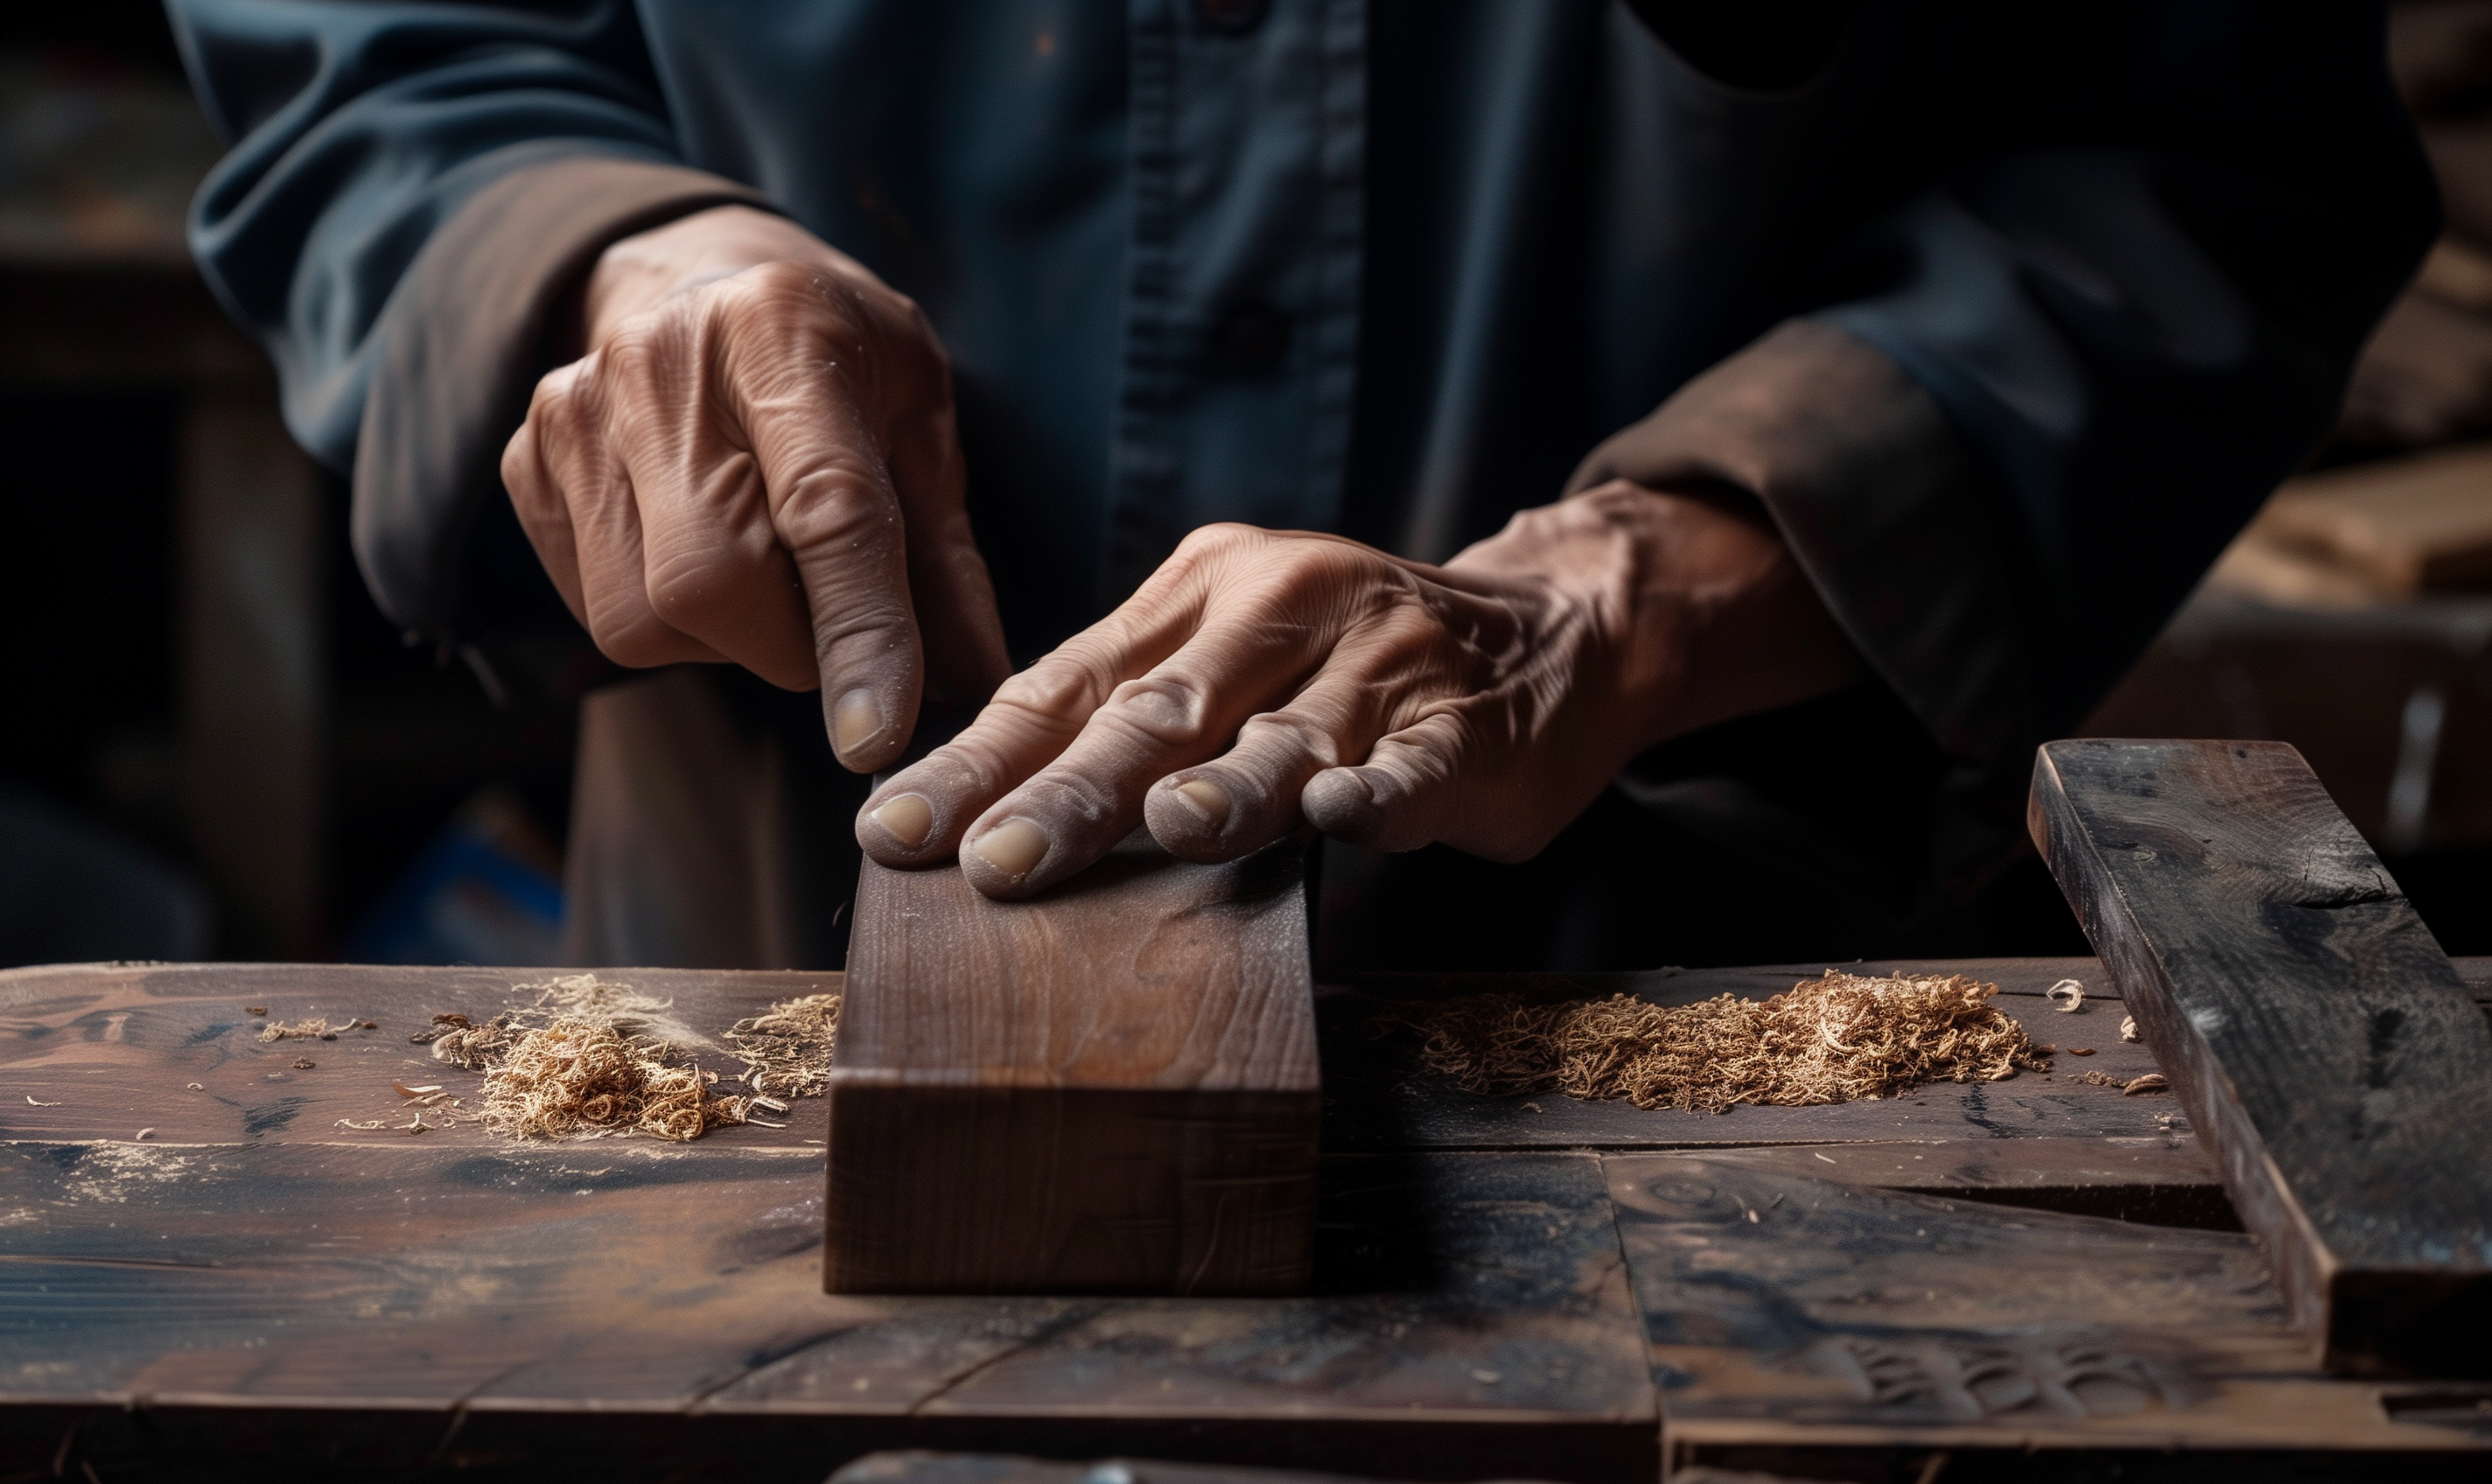 image of wood worker carving into a block of wood